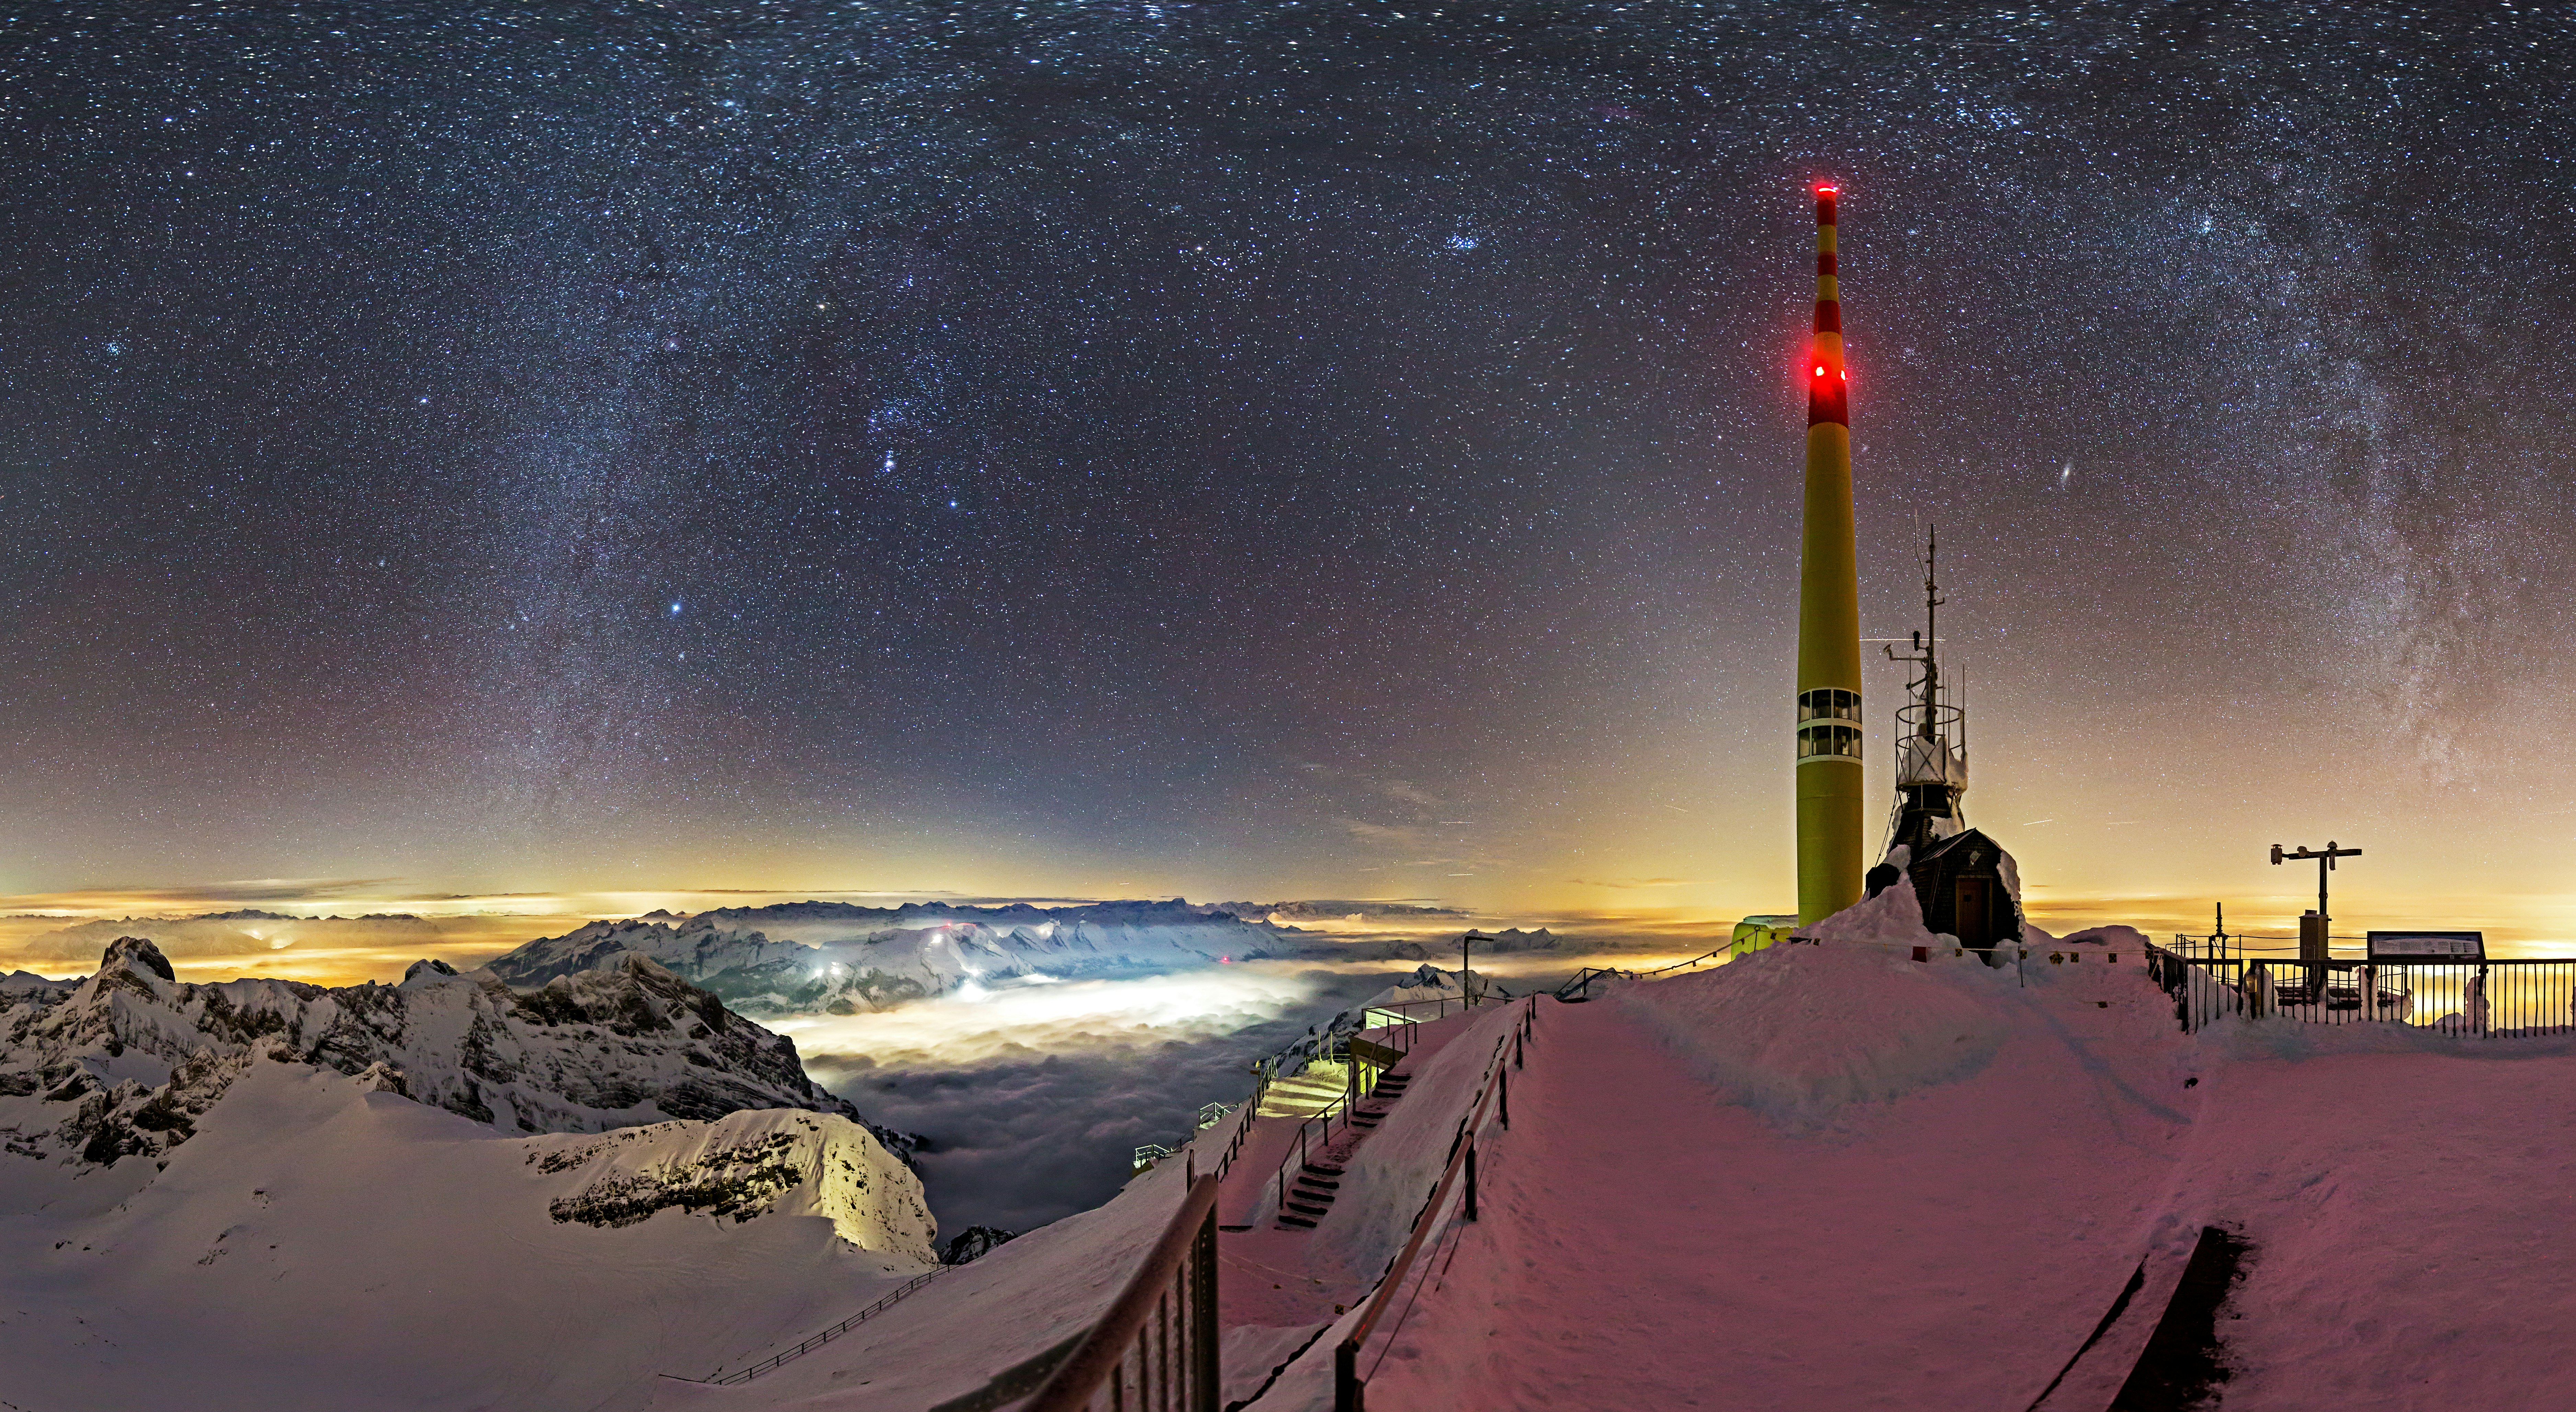 Star magic on the Säntis with accomodation in the “Säntis – the Hotel”